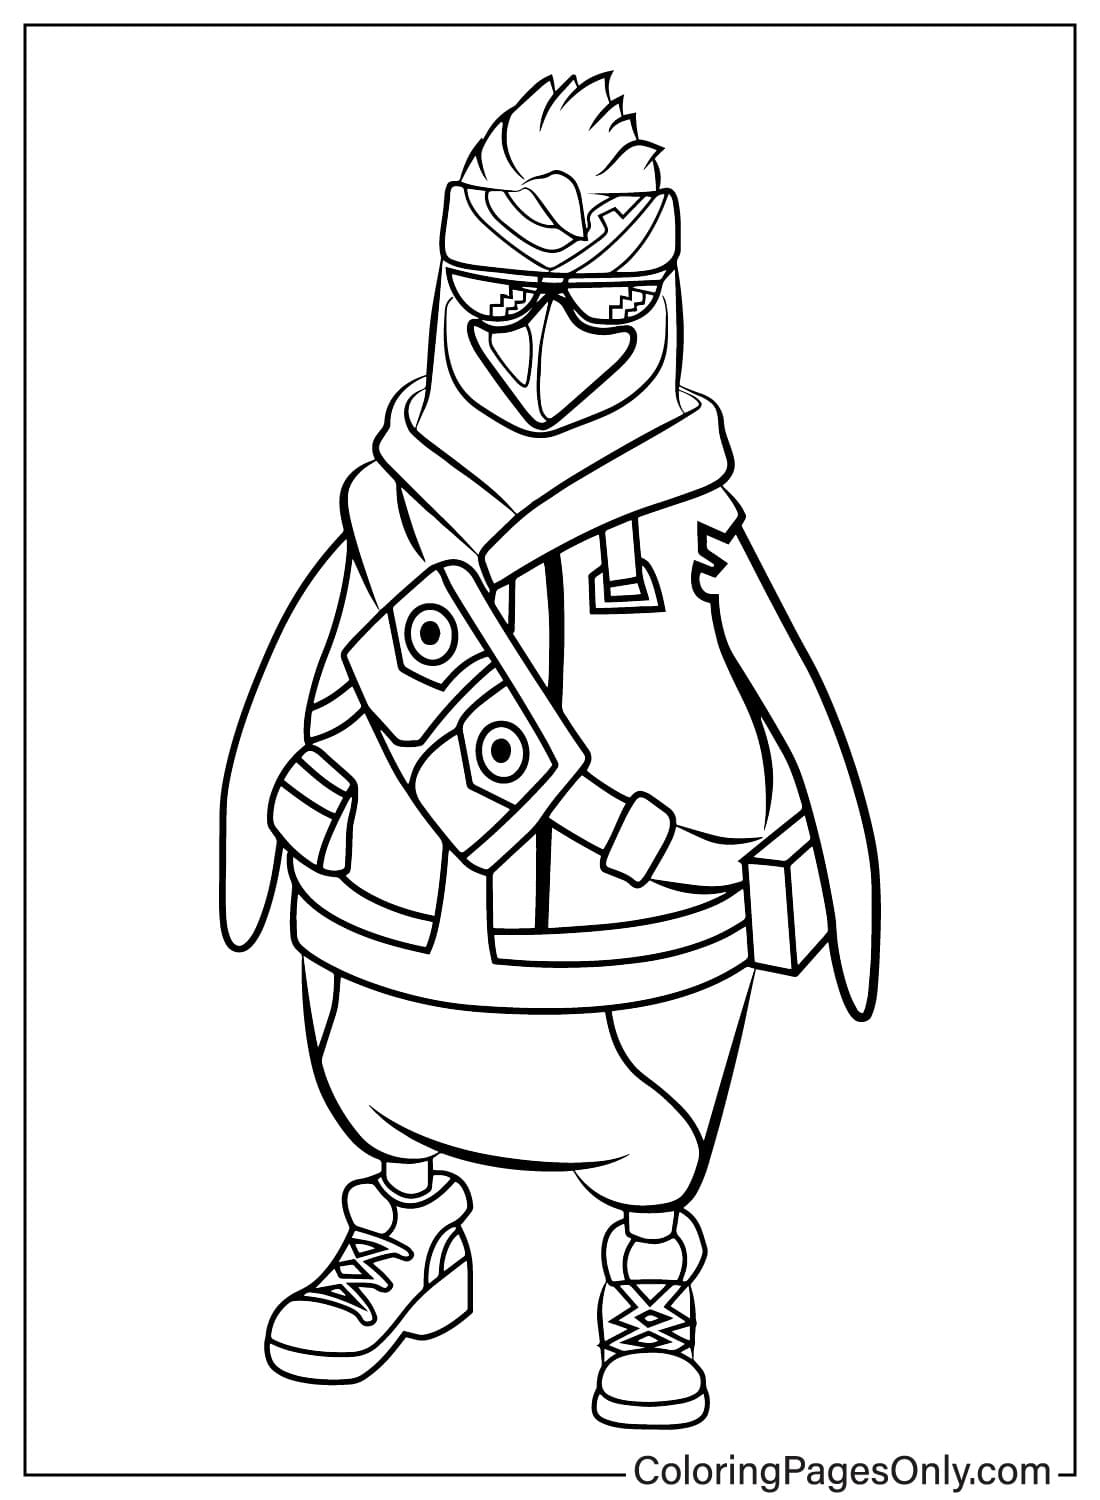 Free Fire Penguin Pet from Free Fire